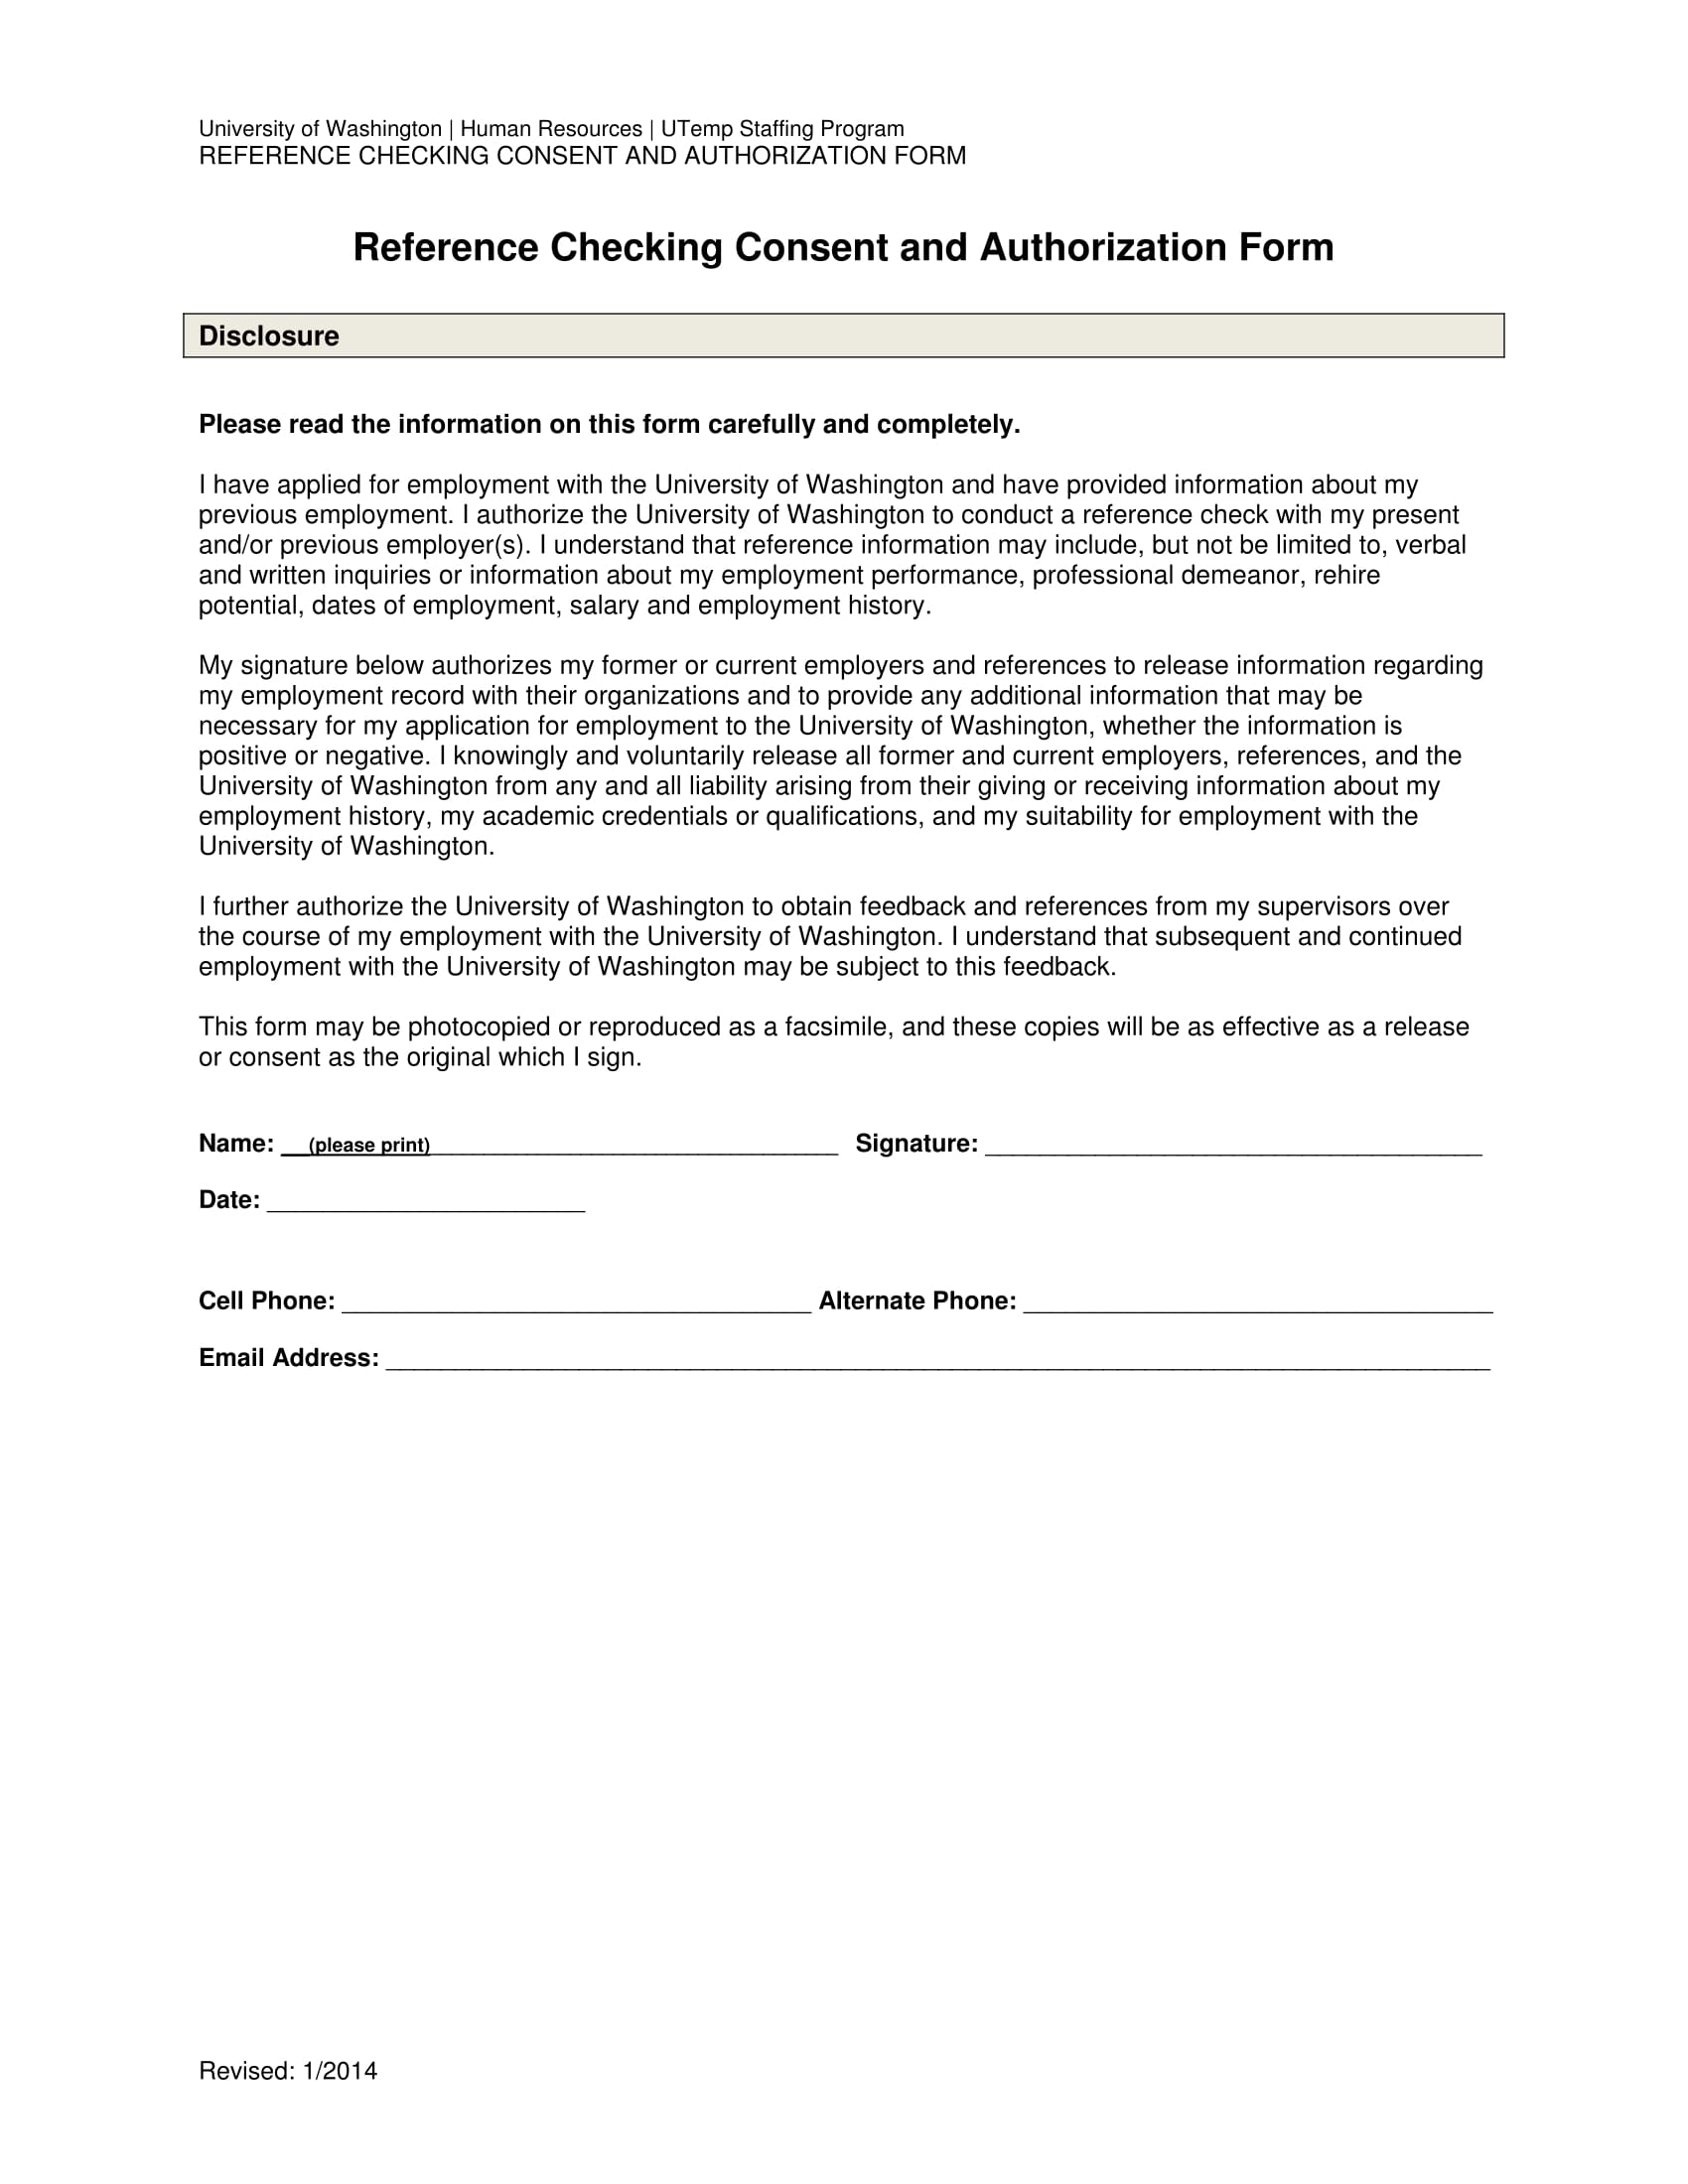 reference checking consent authorization form 1